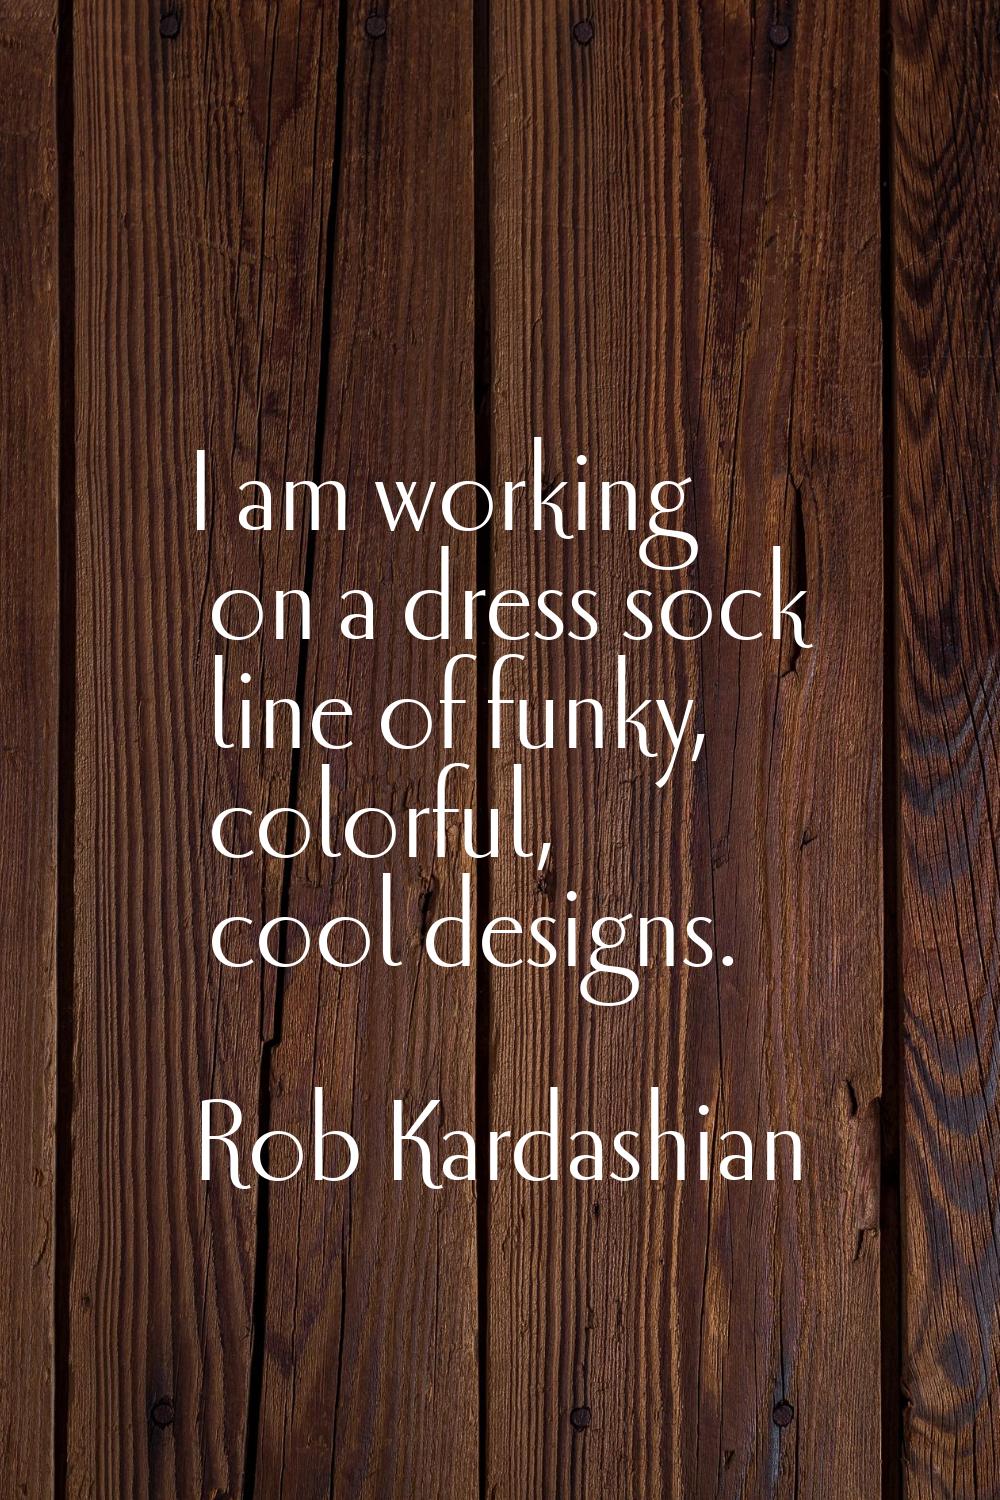 I am working on a dress sock line of funky, colorful, cool designs.